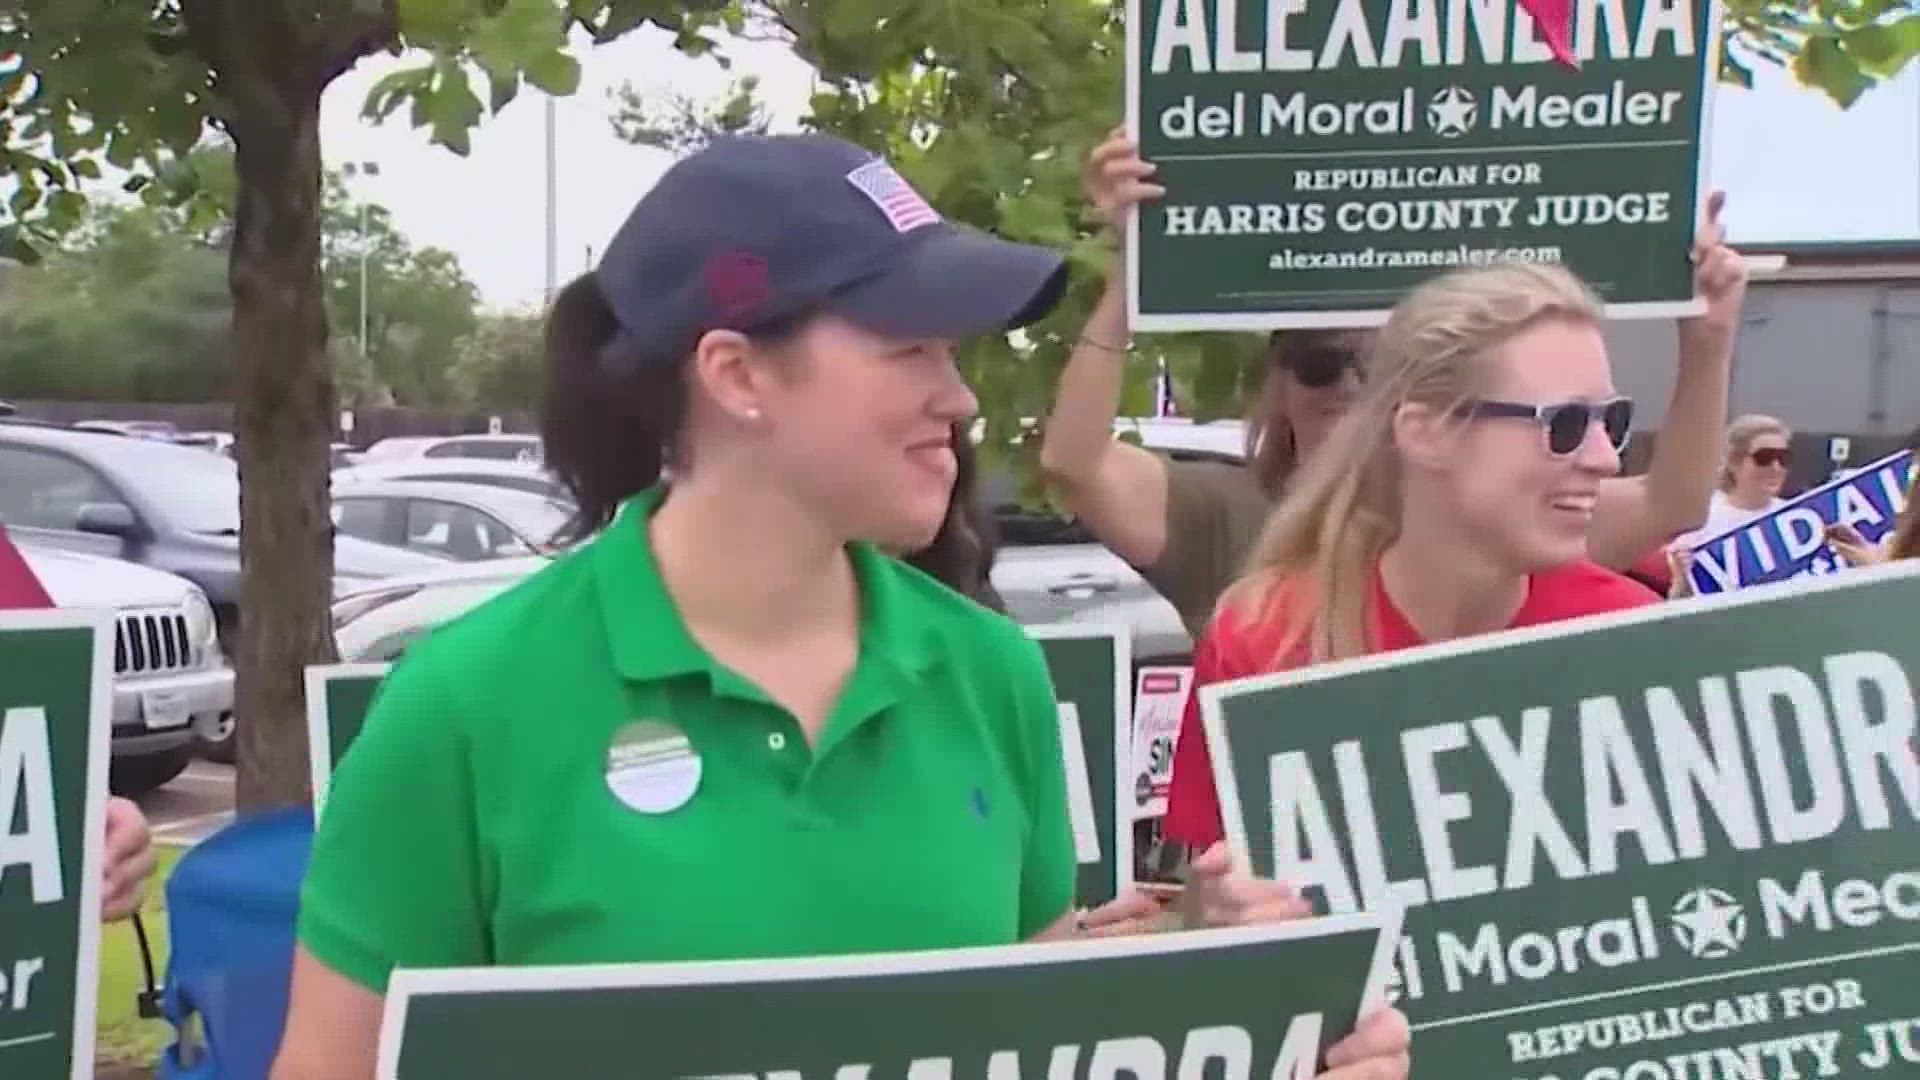 The former Republican challenger failed in her bid to unseat incumbent Harris County Judge Lina Hidalgo during the midterm elections.